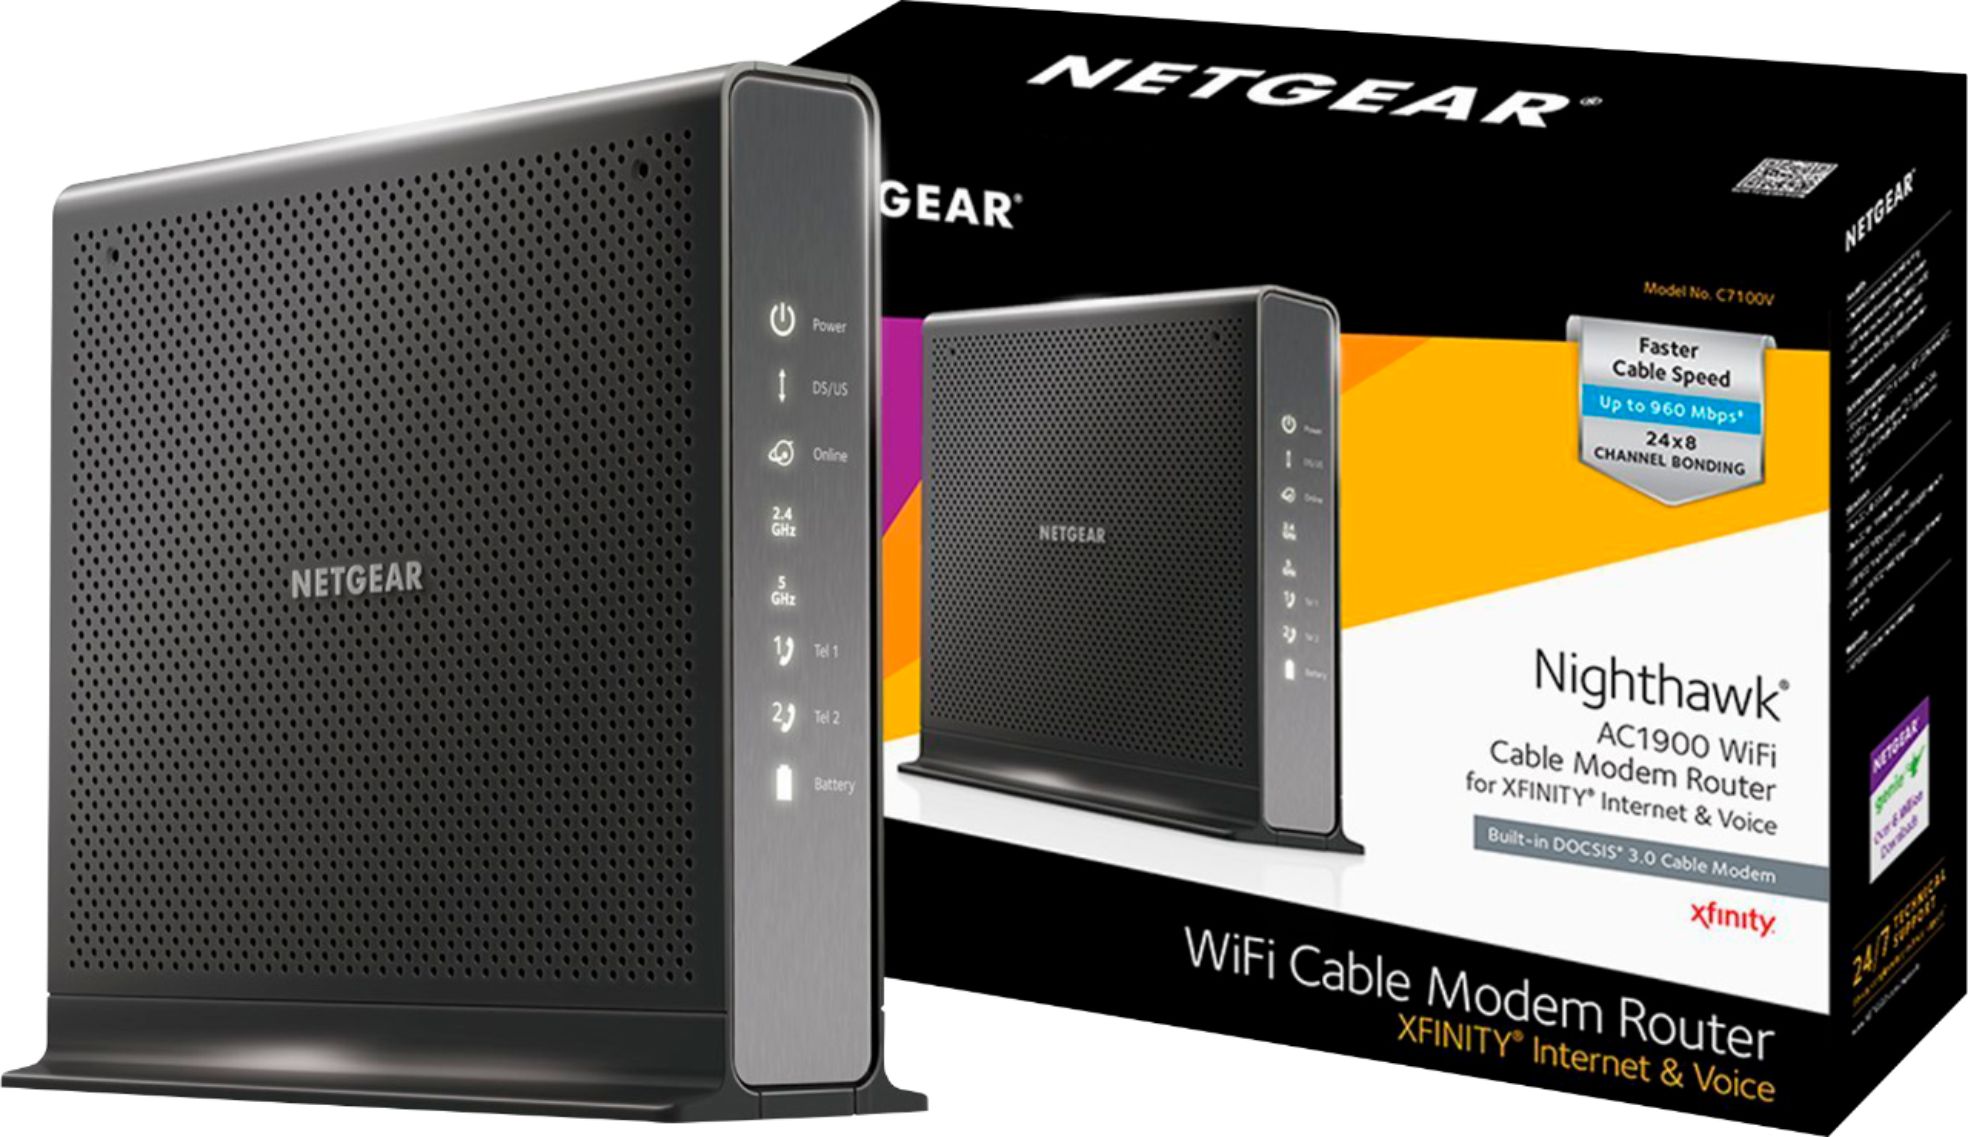 Netgear Nighthawk Dual Band Ac1900 Router With 24 X 8 Docsis 3 0 Cable Modem Black C7100v 100nas Best Buy